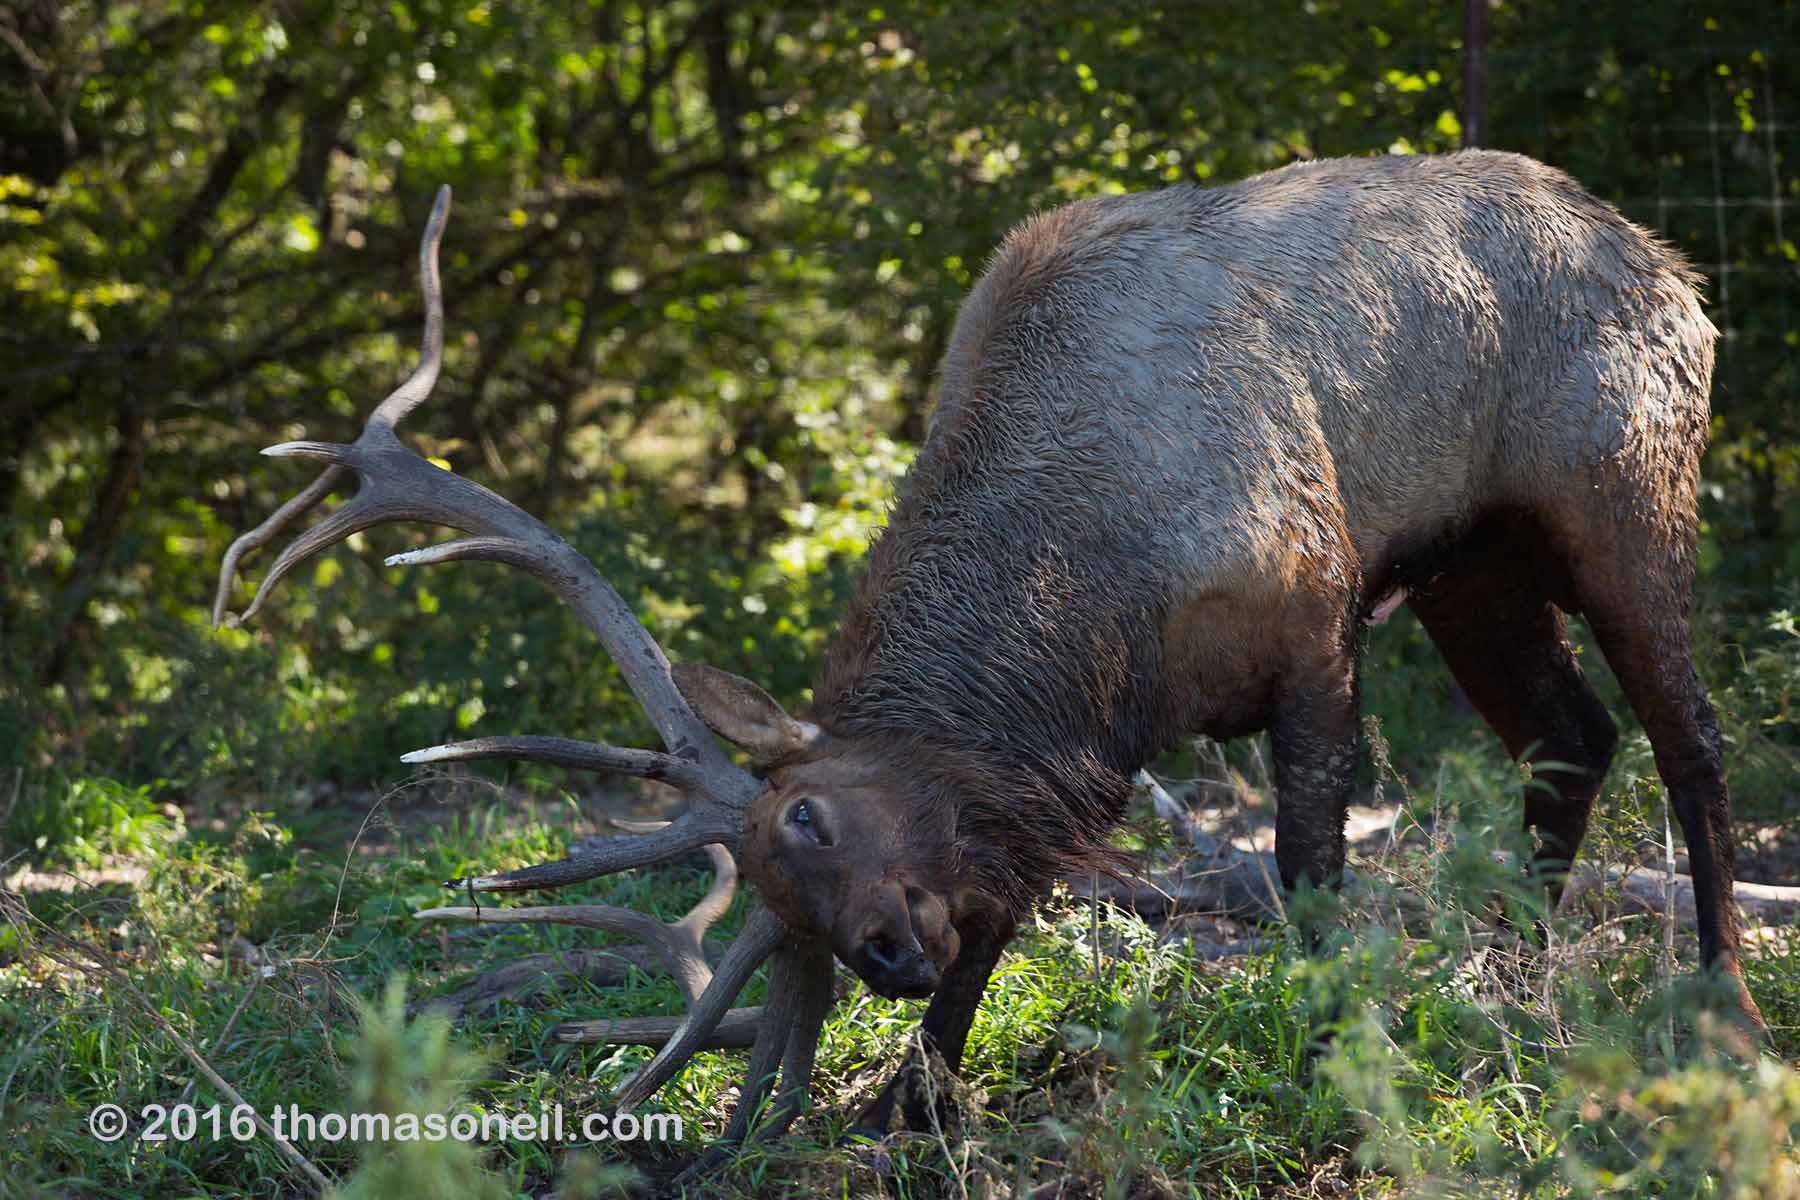 Elk, Lee G. Simmons Conservation Park and Wildlife Safari.  Click for next photo.